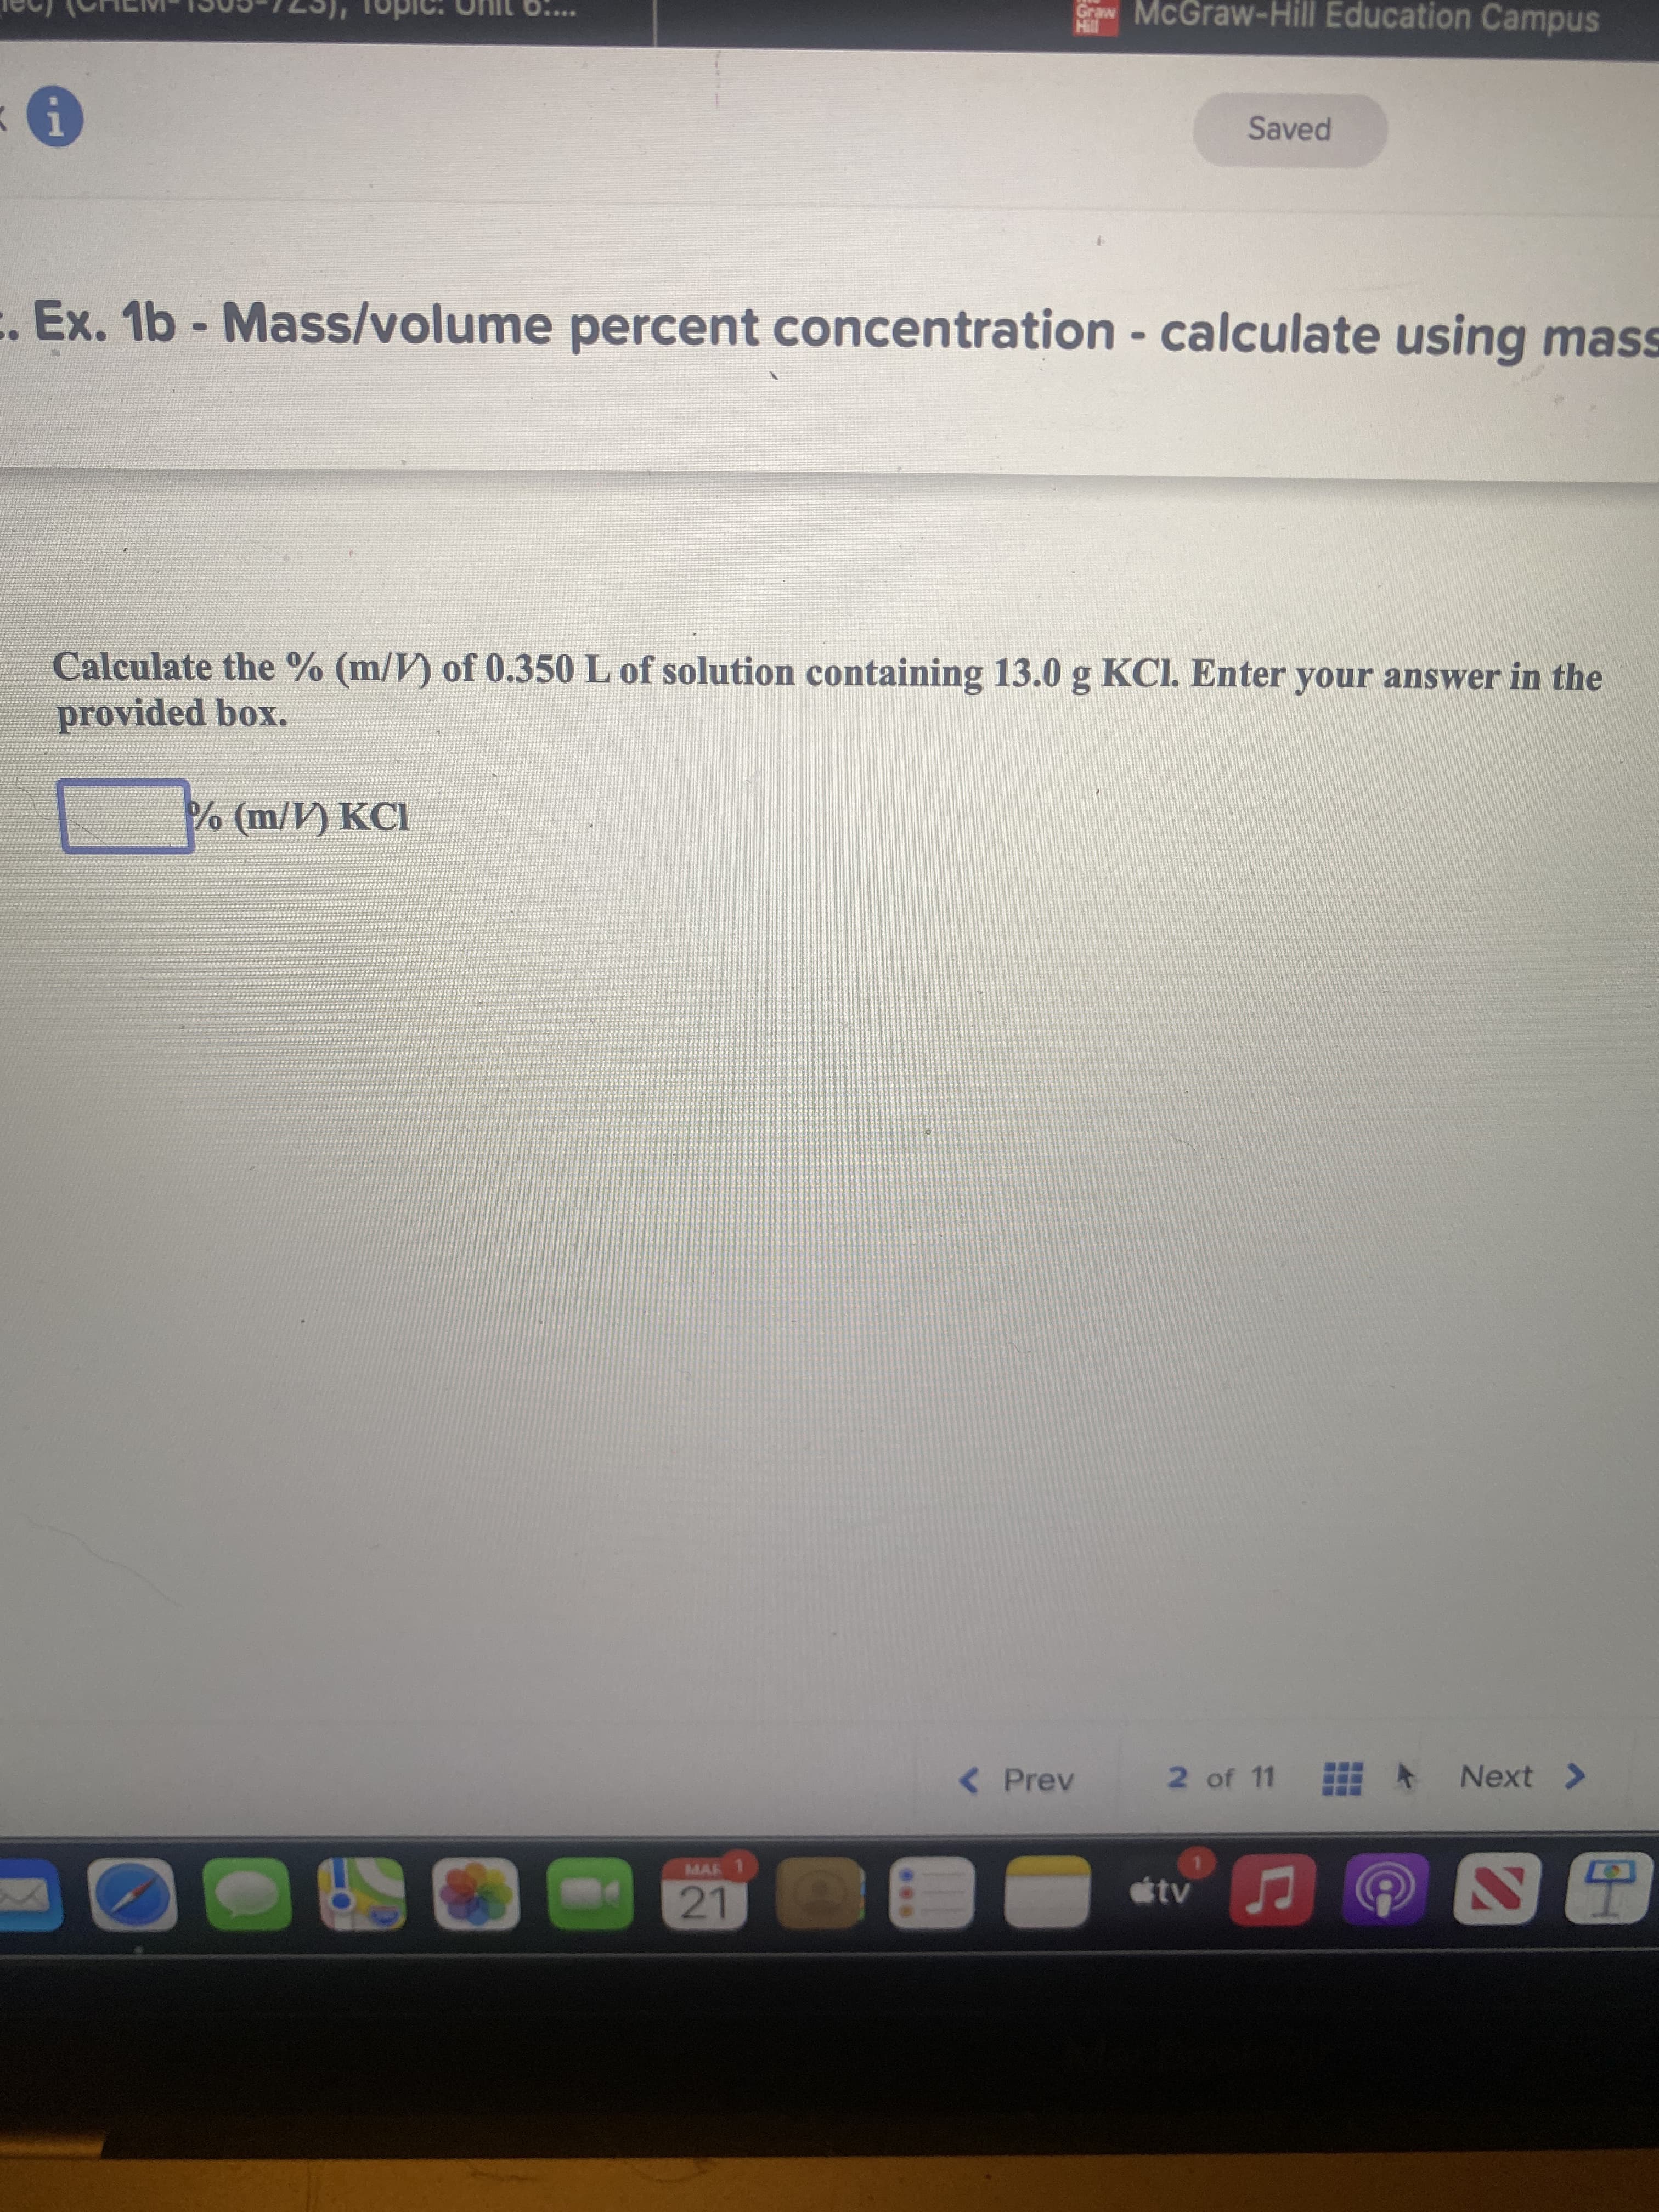 Craw McGraw-Hill Education Campus
Saved
Ex. 1b - Mass/volume percent concentration - calculate using mass
Calculate the % (m/V) of 0.350 L of solution containing 13.0 g KCI. Enter your answer in the
provided box.
(m/V) KCI
( Prev
2 of 11 甜ト
Next >
MAR 1
tv
